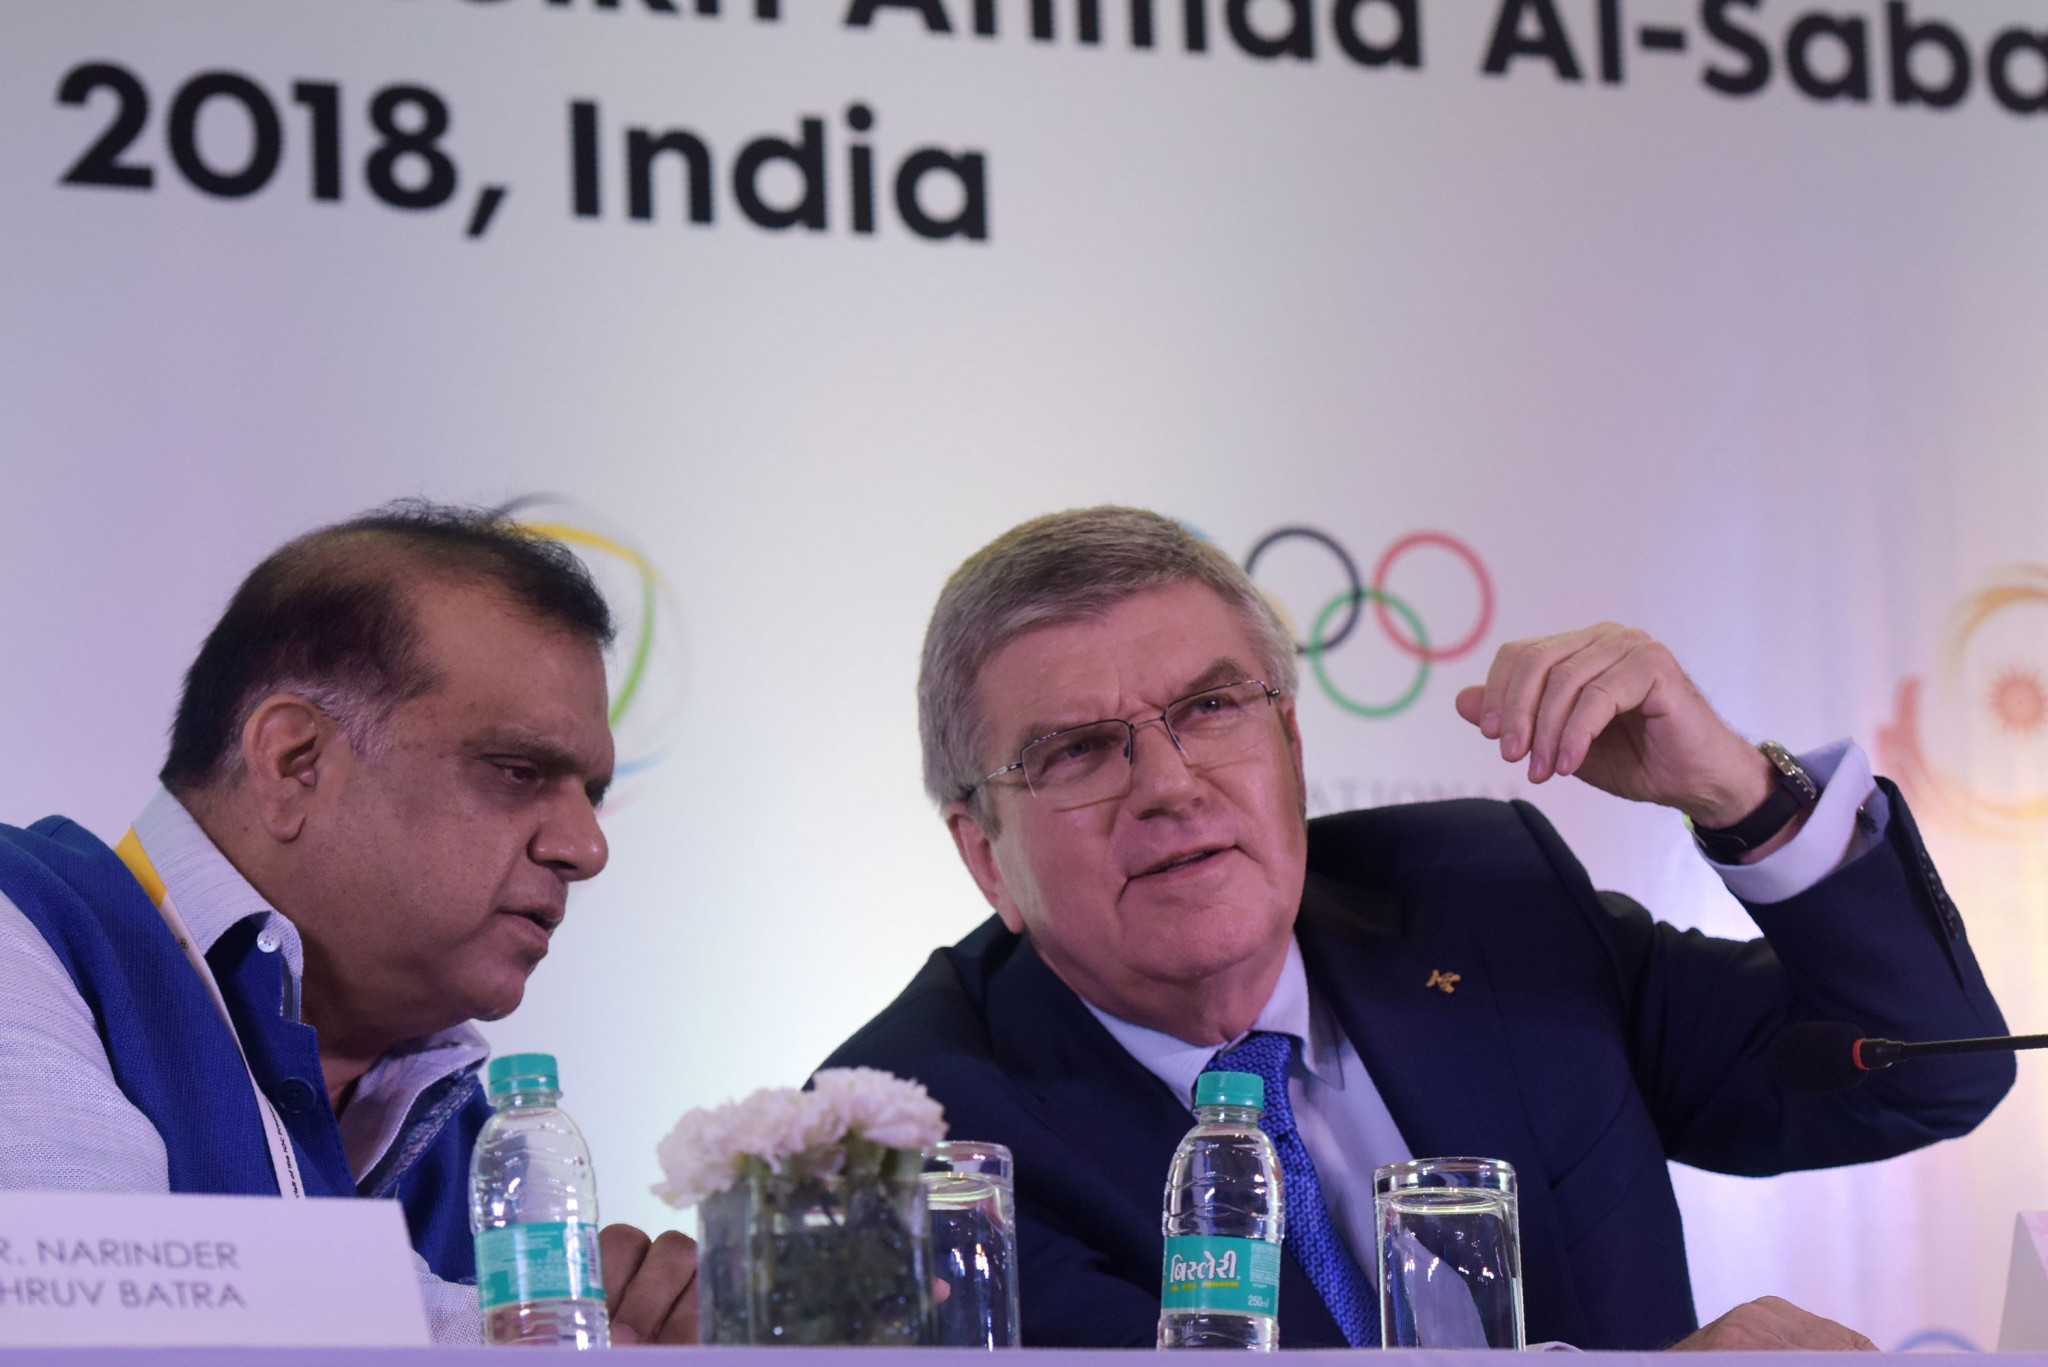 IOA President Narinder Batra has confirmed the country will bid for the 2032 Olympic Games ©Getty Images